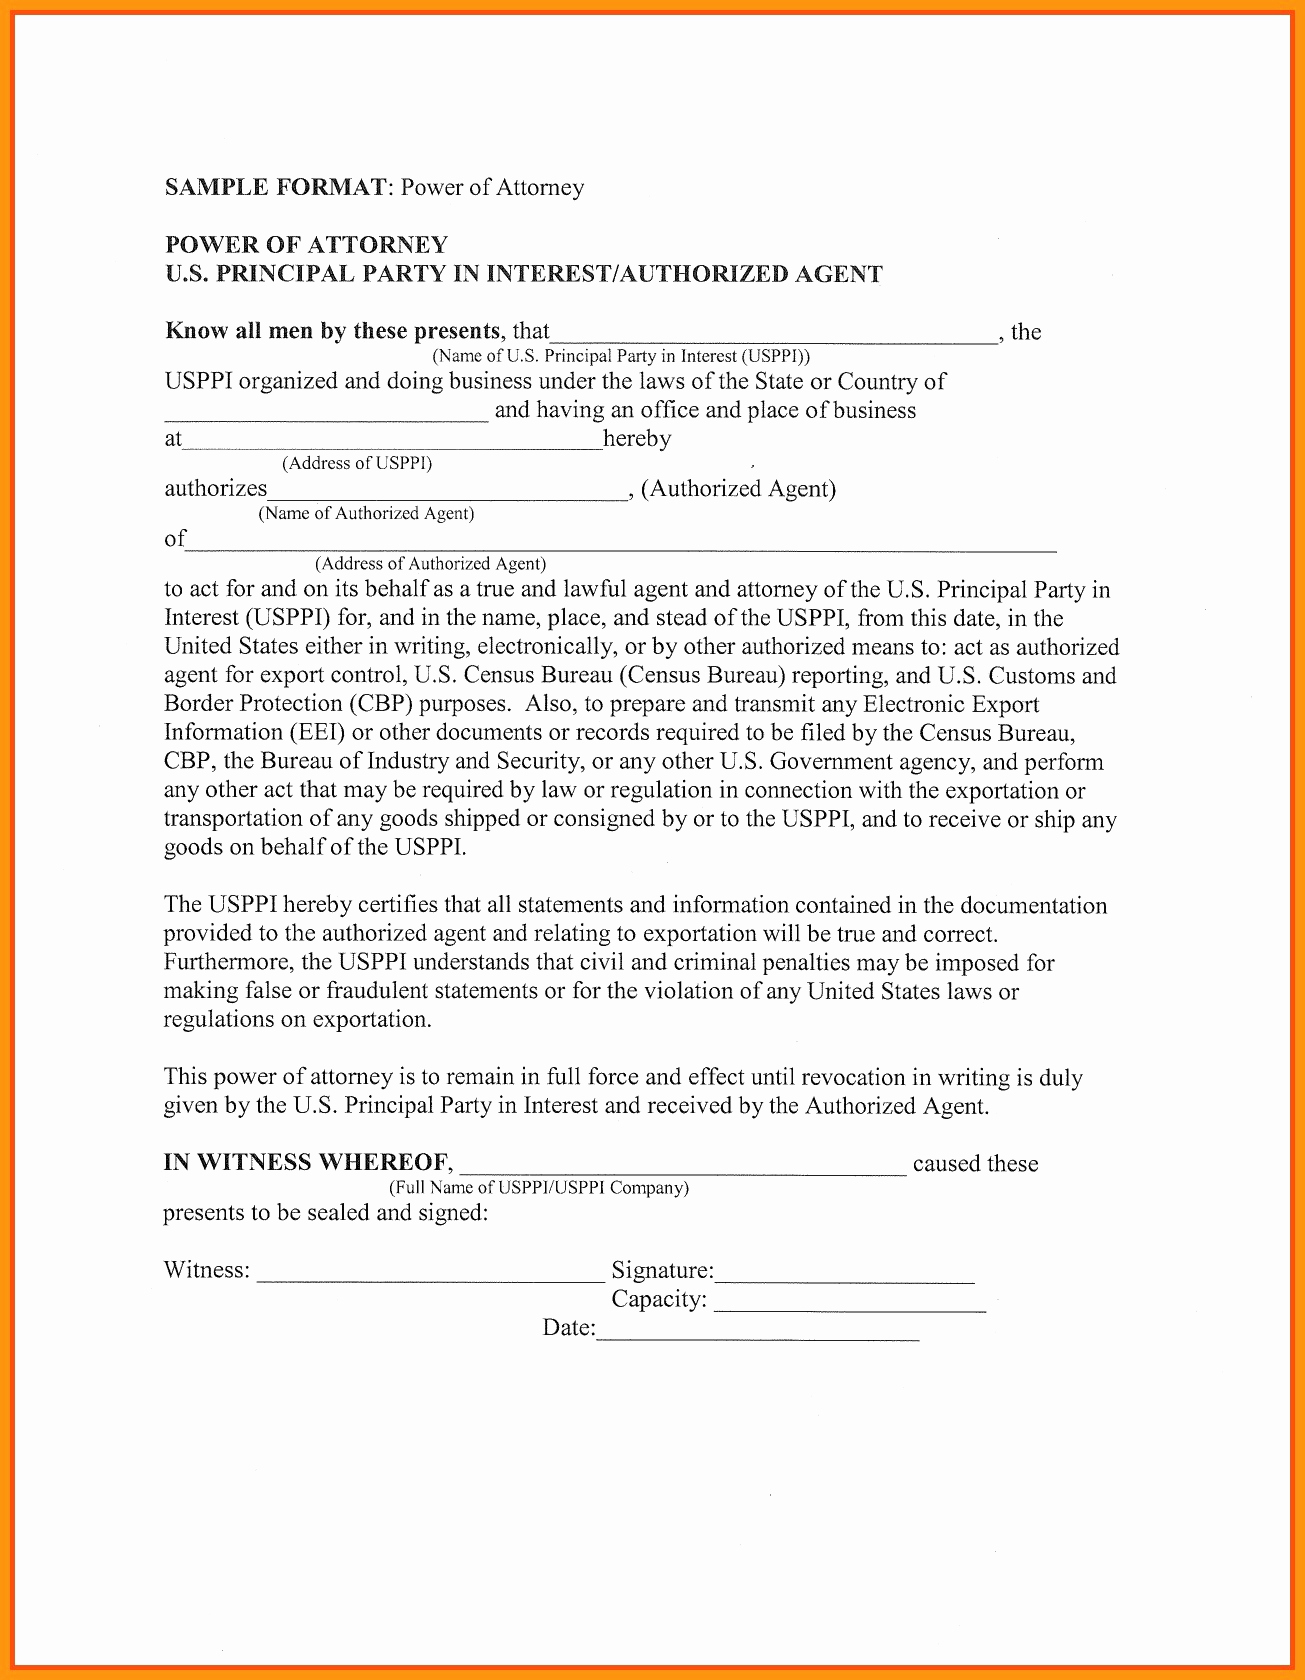 Mississippi Power Of attorney Awesome Power attorney form Mississippi Awesome Mississippi Power